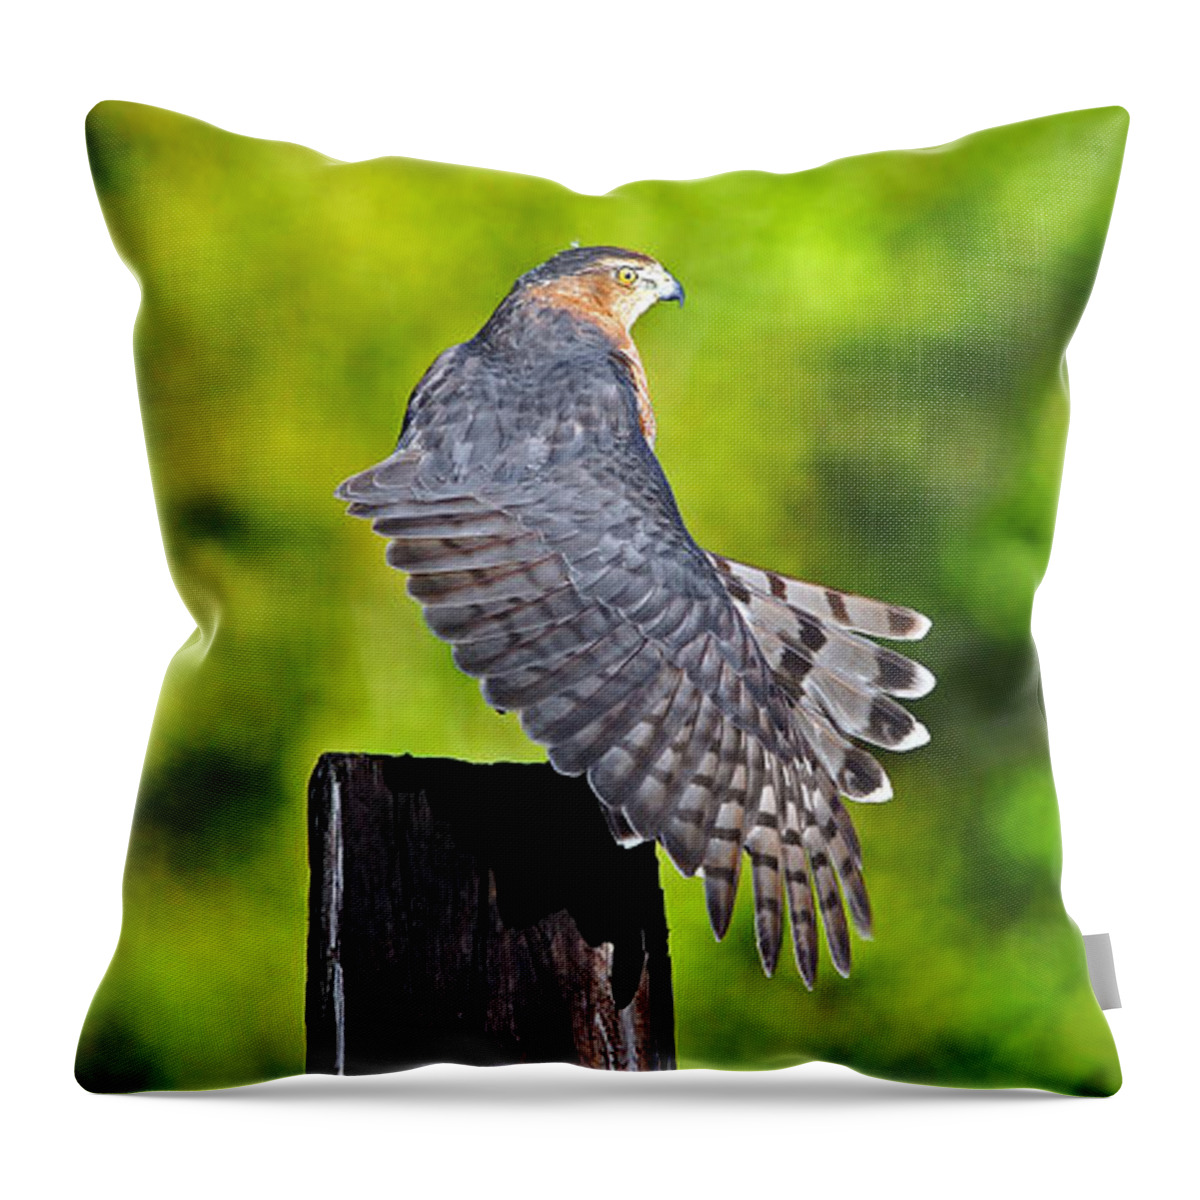 Red Shouldered Hawk Throw Pillow featuring the photograph Fine Feathers by Al Powell Photography USA